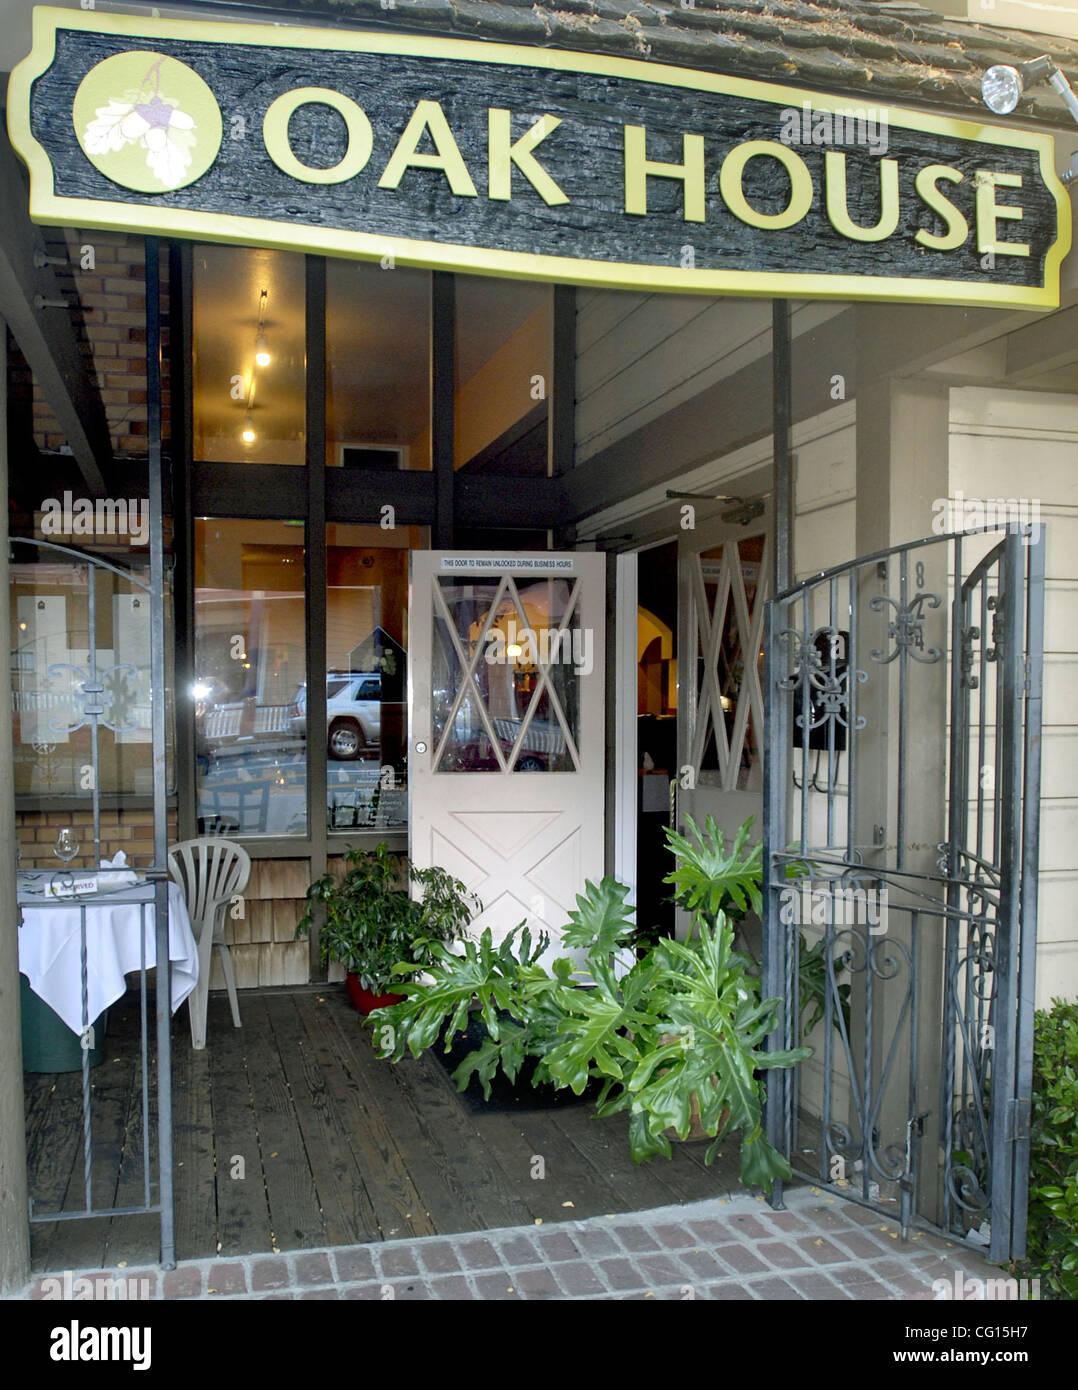 The outside of the "Oak House" restaurant in downtown Pleasanton, Calif., on Tuesday, July 24, 2007. (Doug Duran/Contra Costa Times) Stock Photo